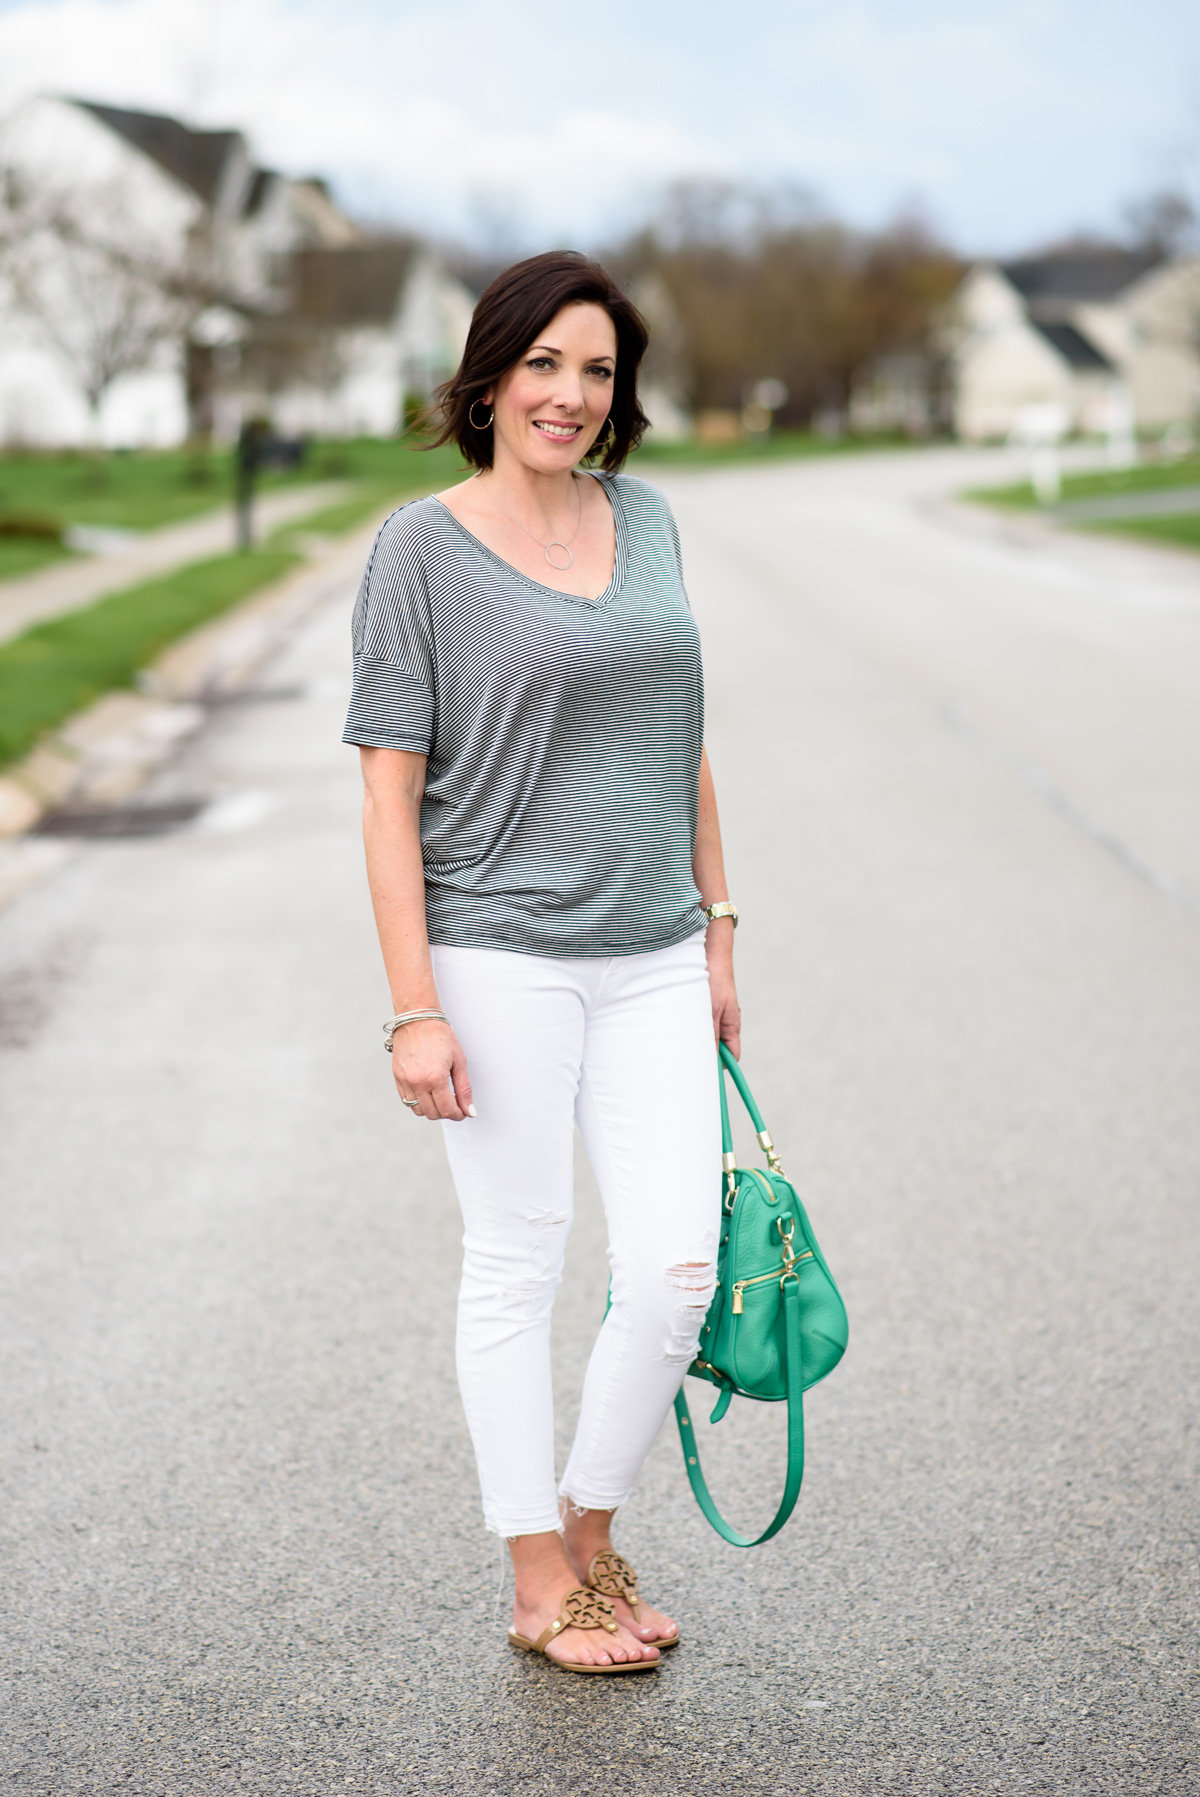 Casual Spring Outfits for Women Over 40: Navy and White Stripe Dolman Sleeve Top with White Jeans and a green handbag